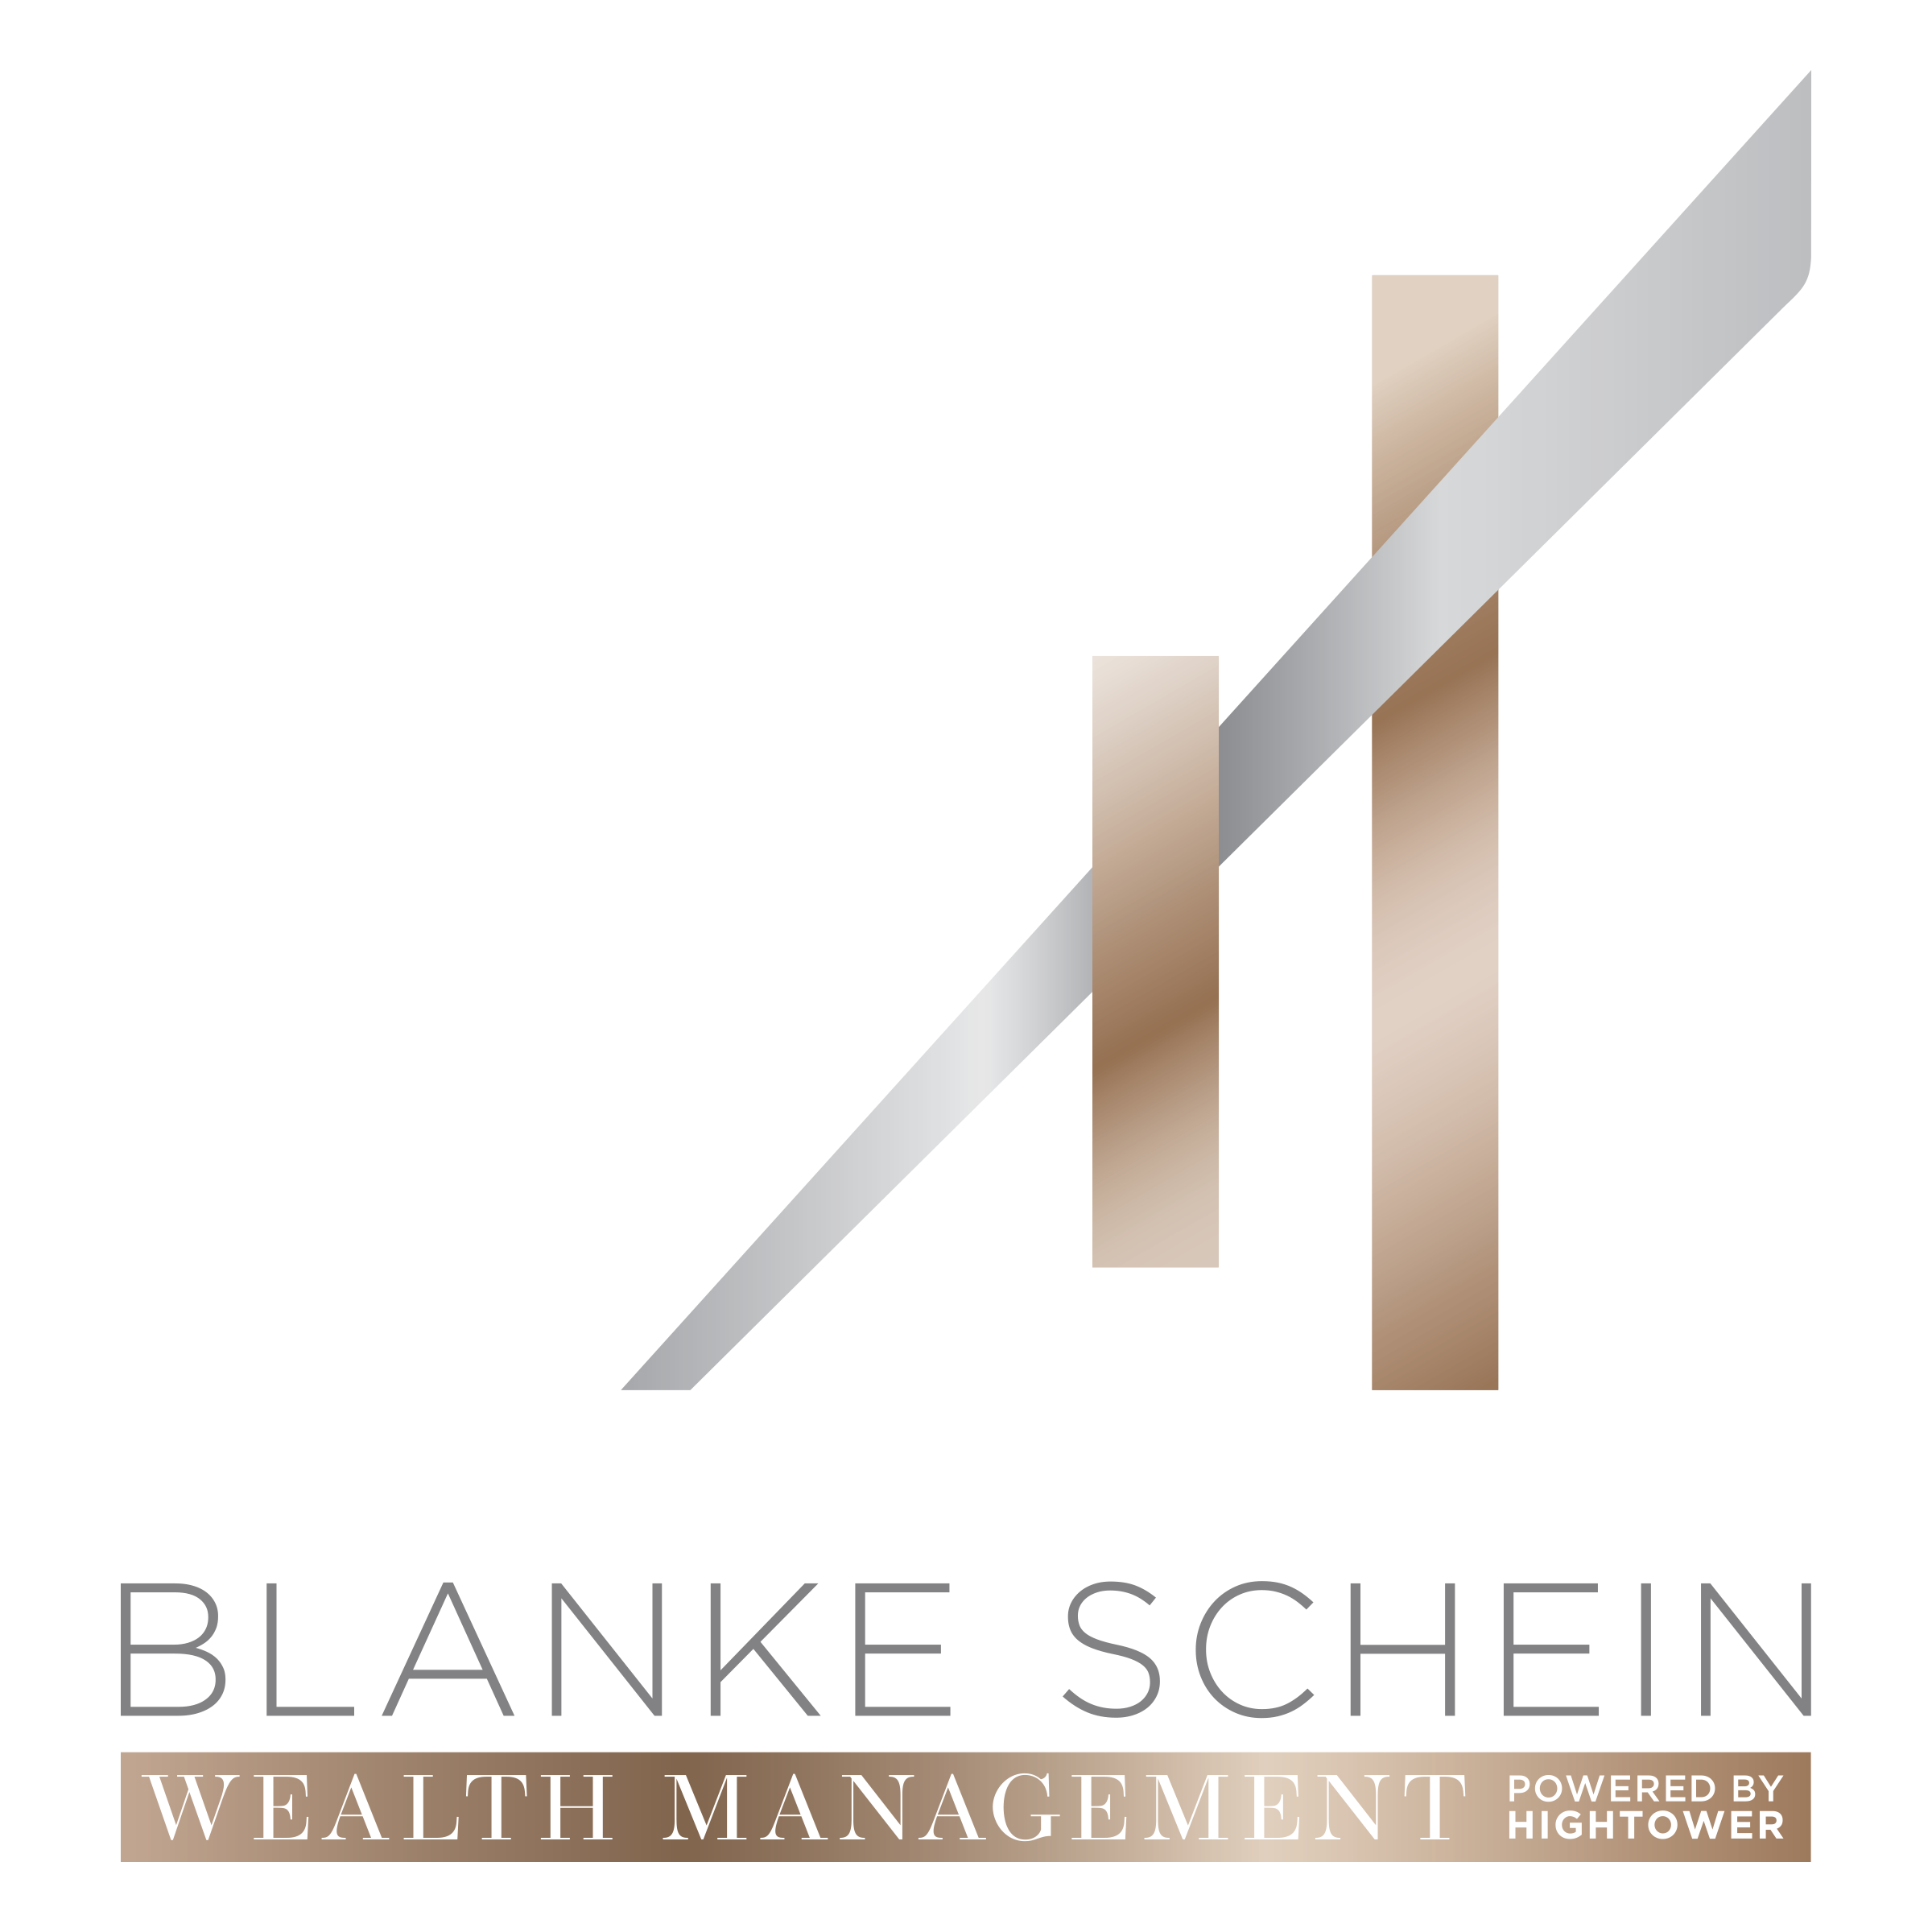 Palm Springs, California, United States agency FrogFrenchie Design helped Blanke Schein Wealth Management | Hightower grow their business with SEO and digital marketing